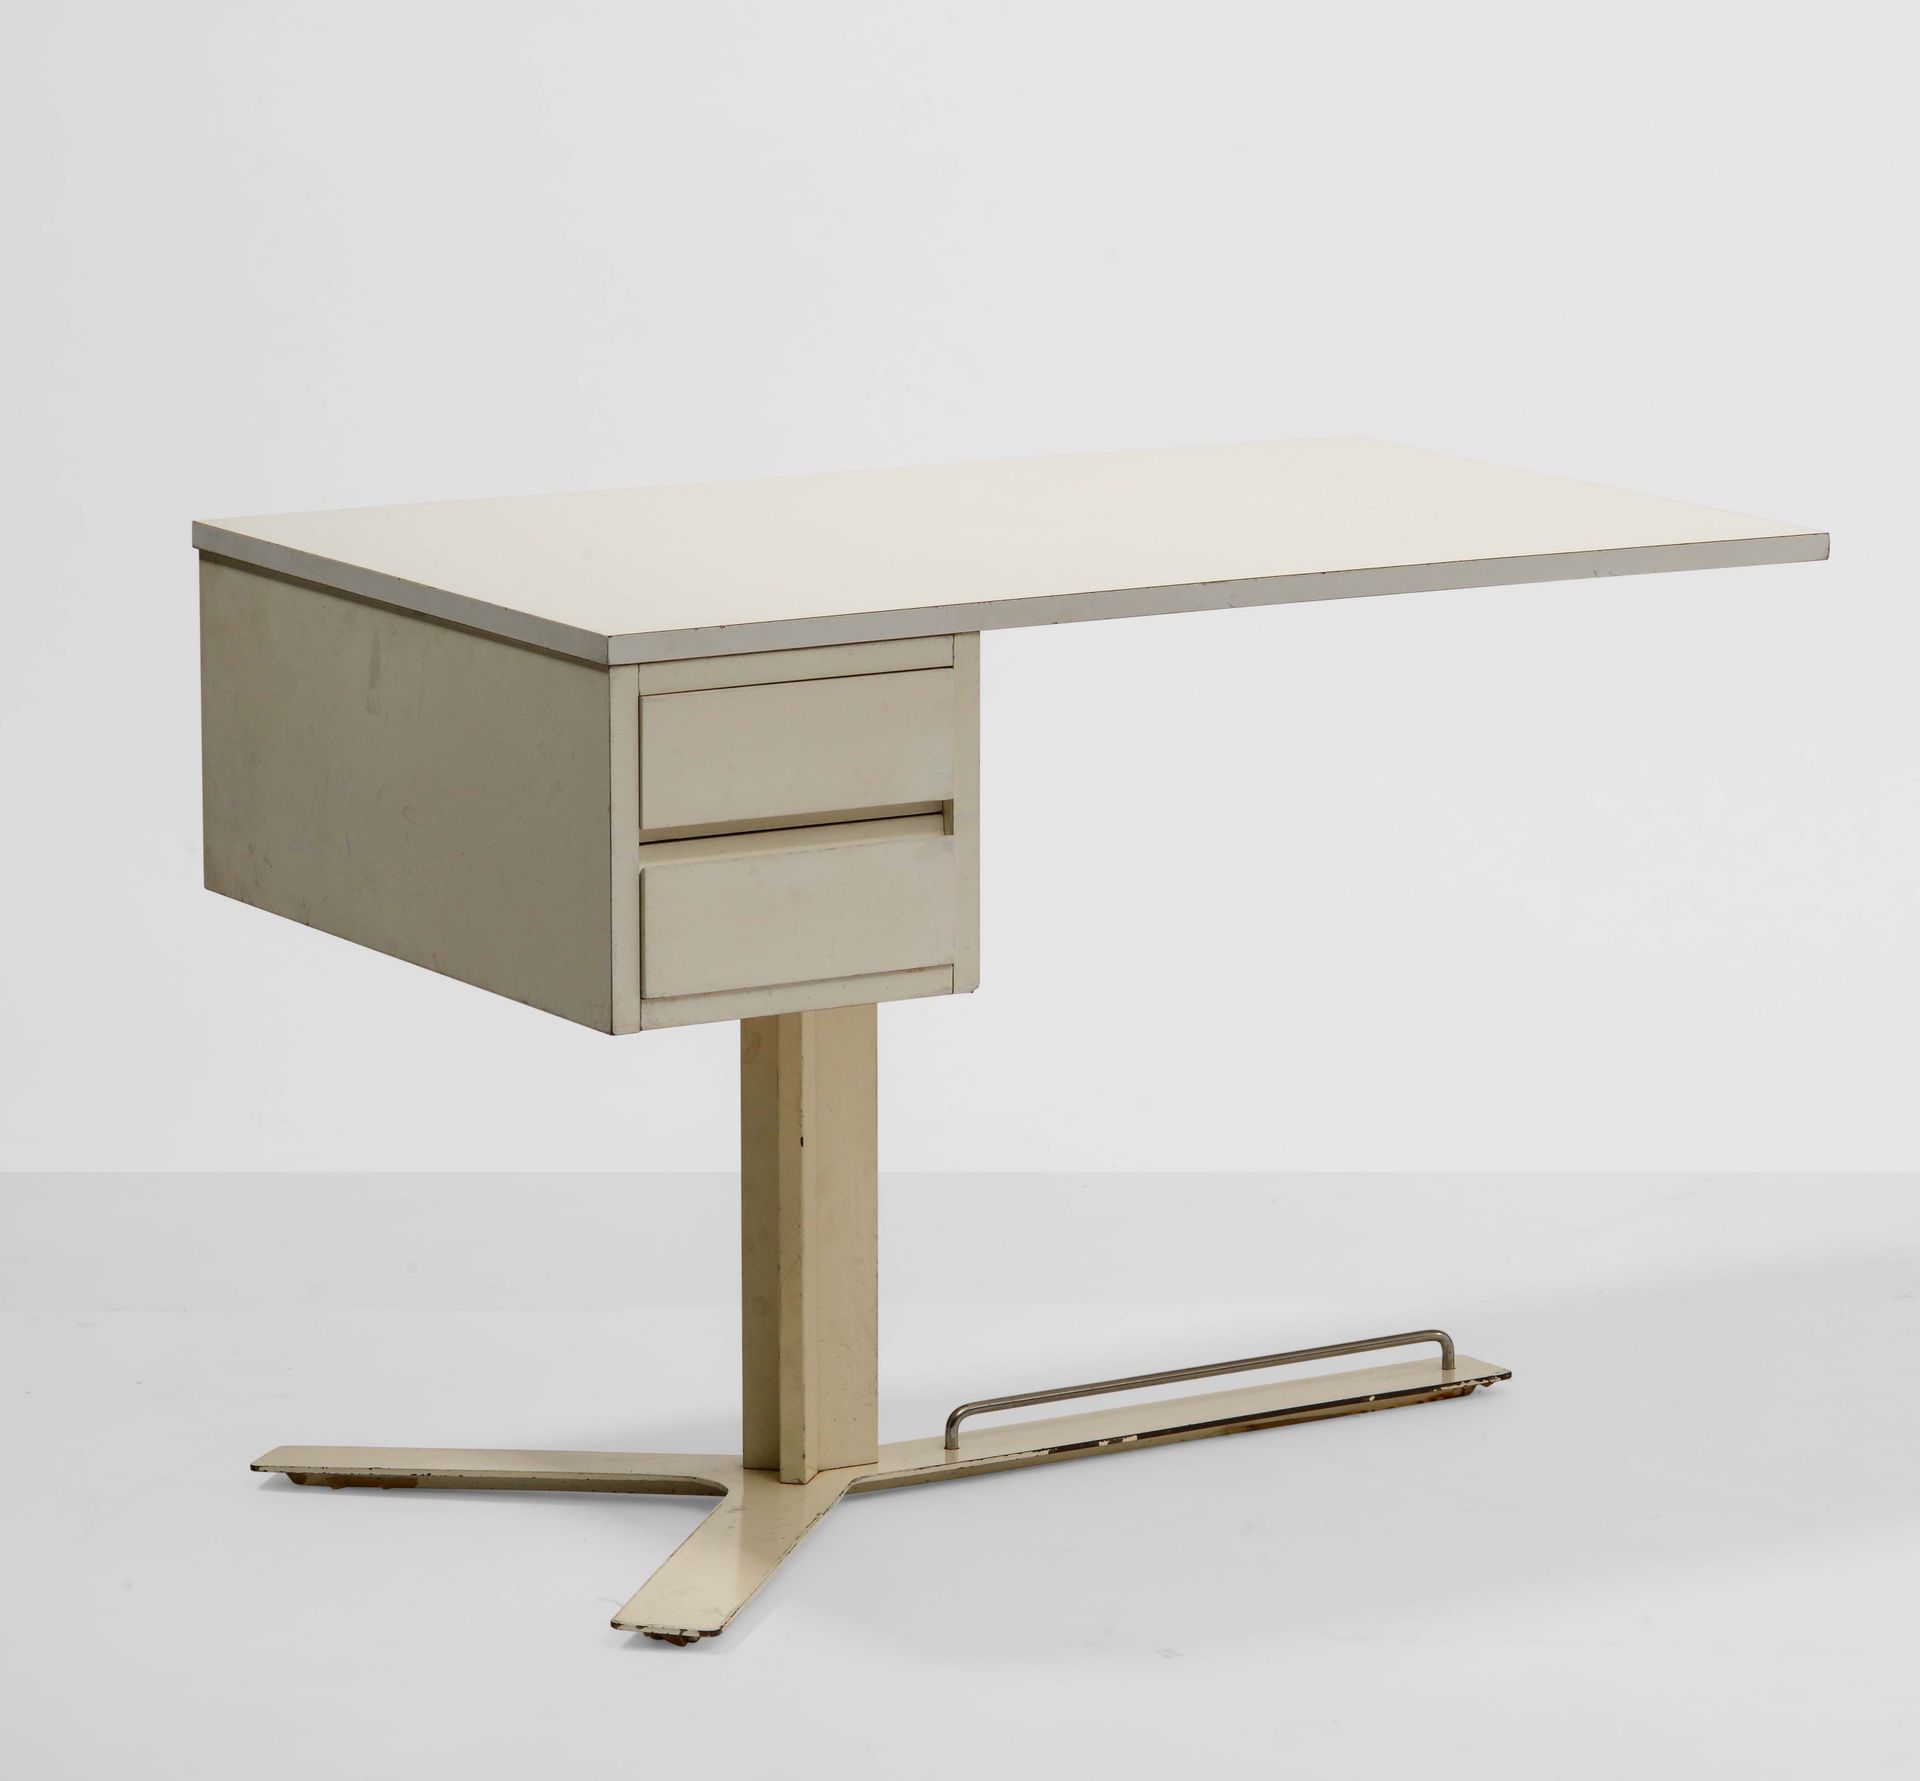 Antonello Mosca, Desk with lacquered wood frame and chromium-plated metal frame.&hellip;